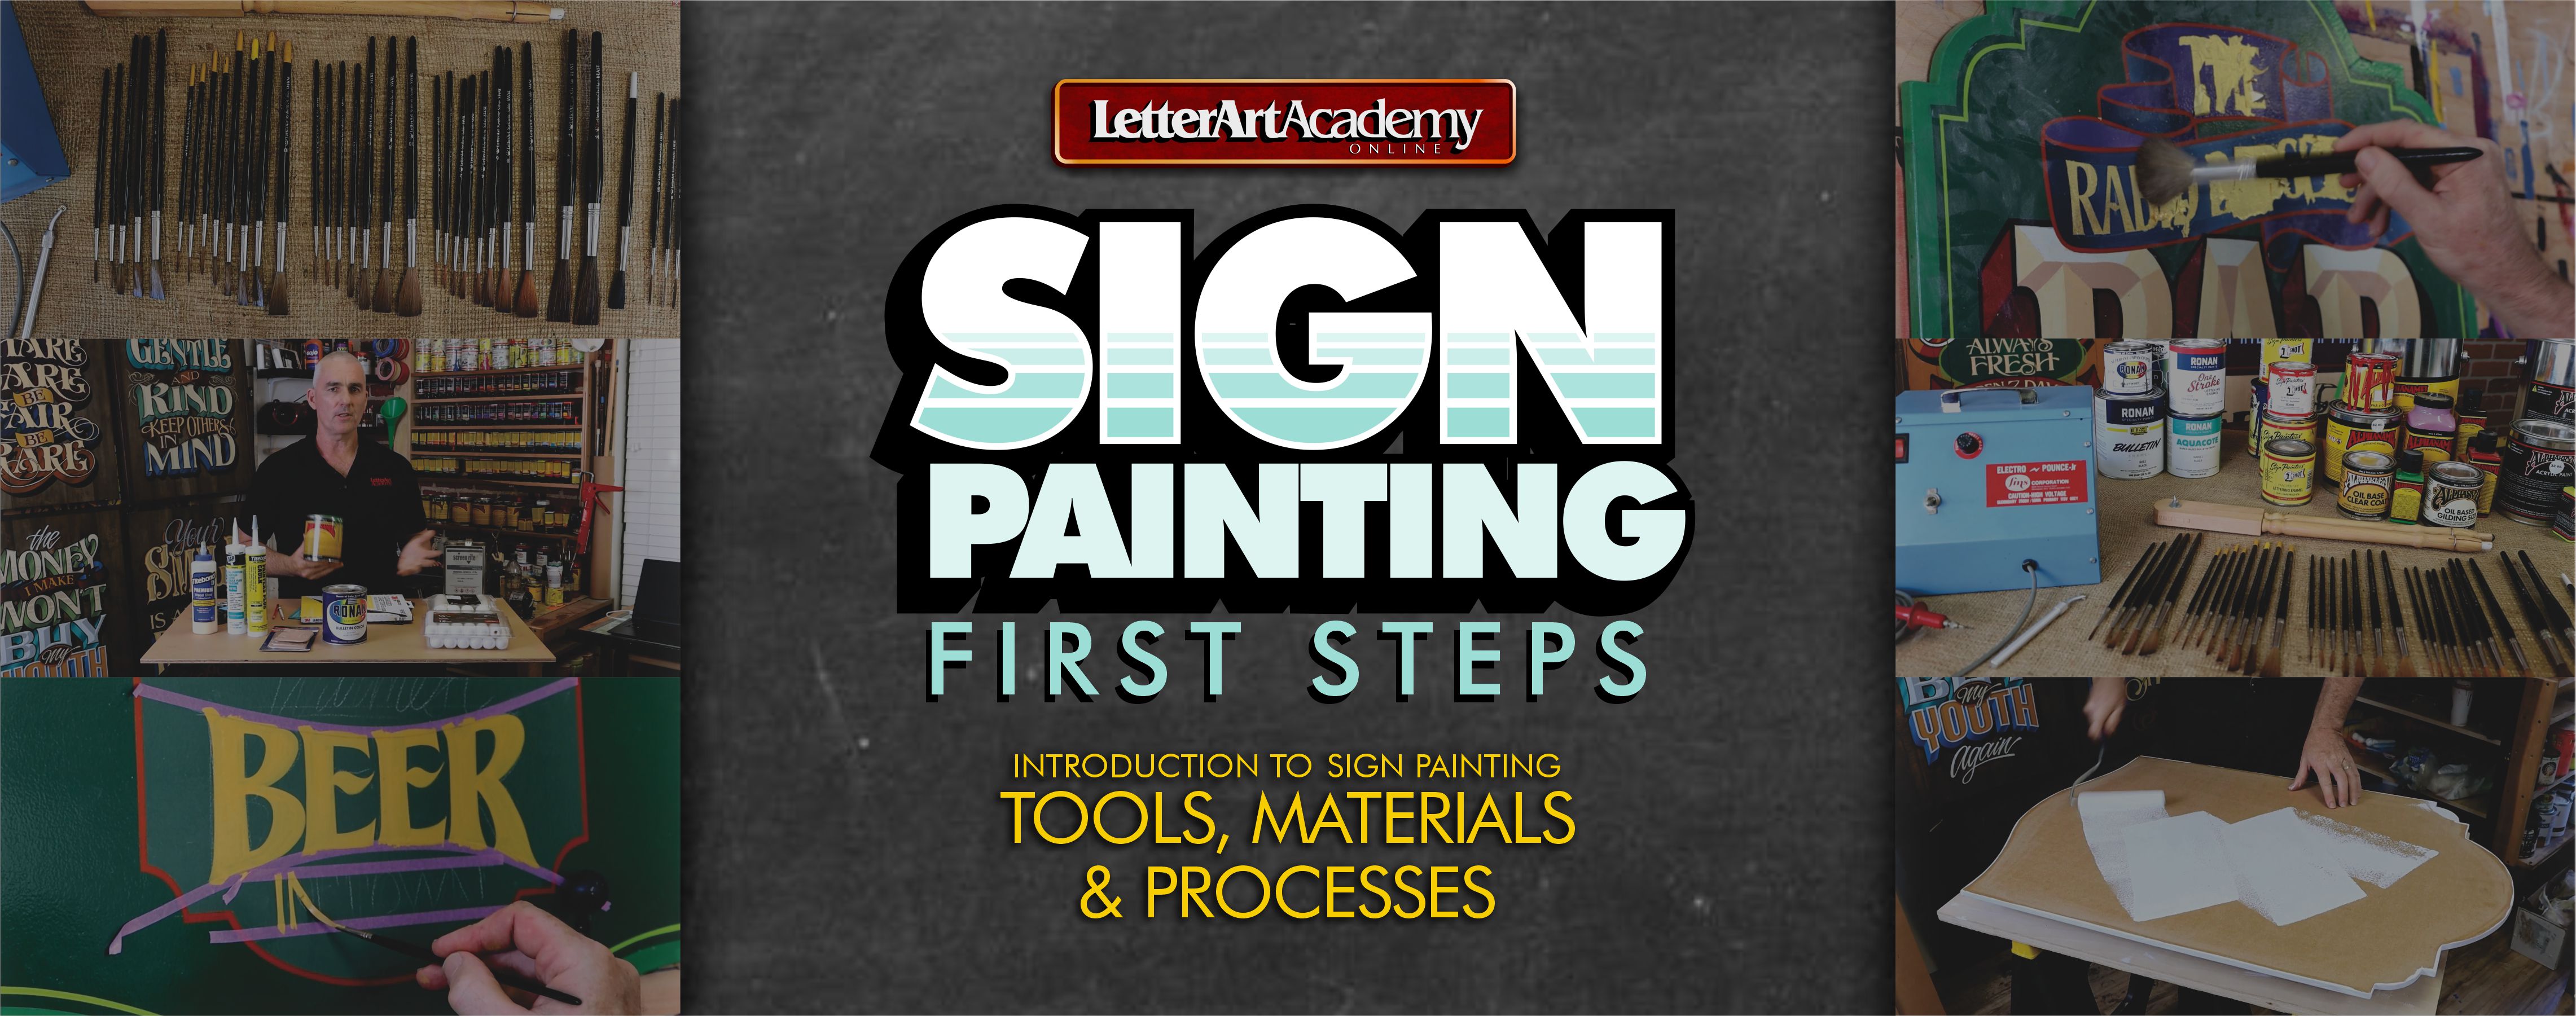 Online Signwriting Signpainting course Learn Sigpainting